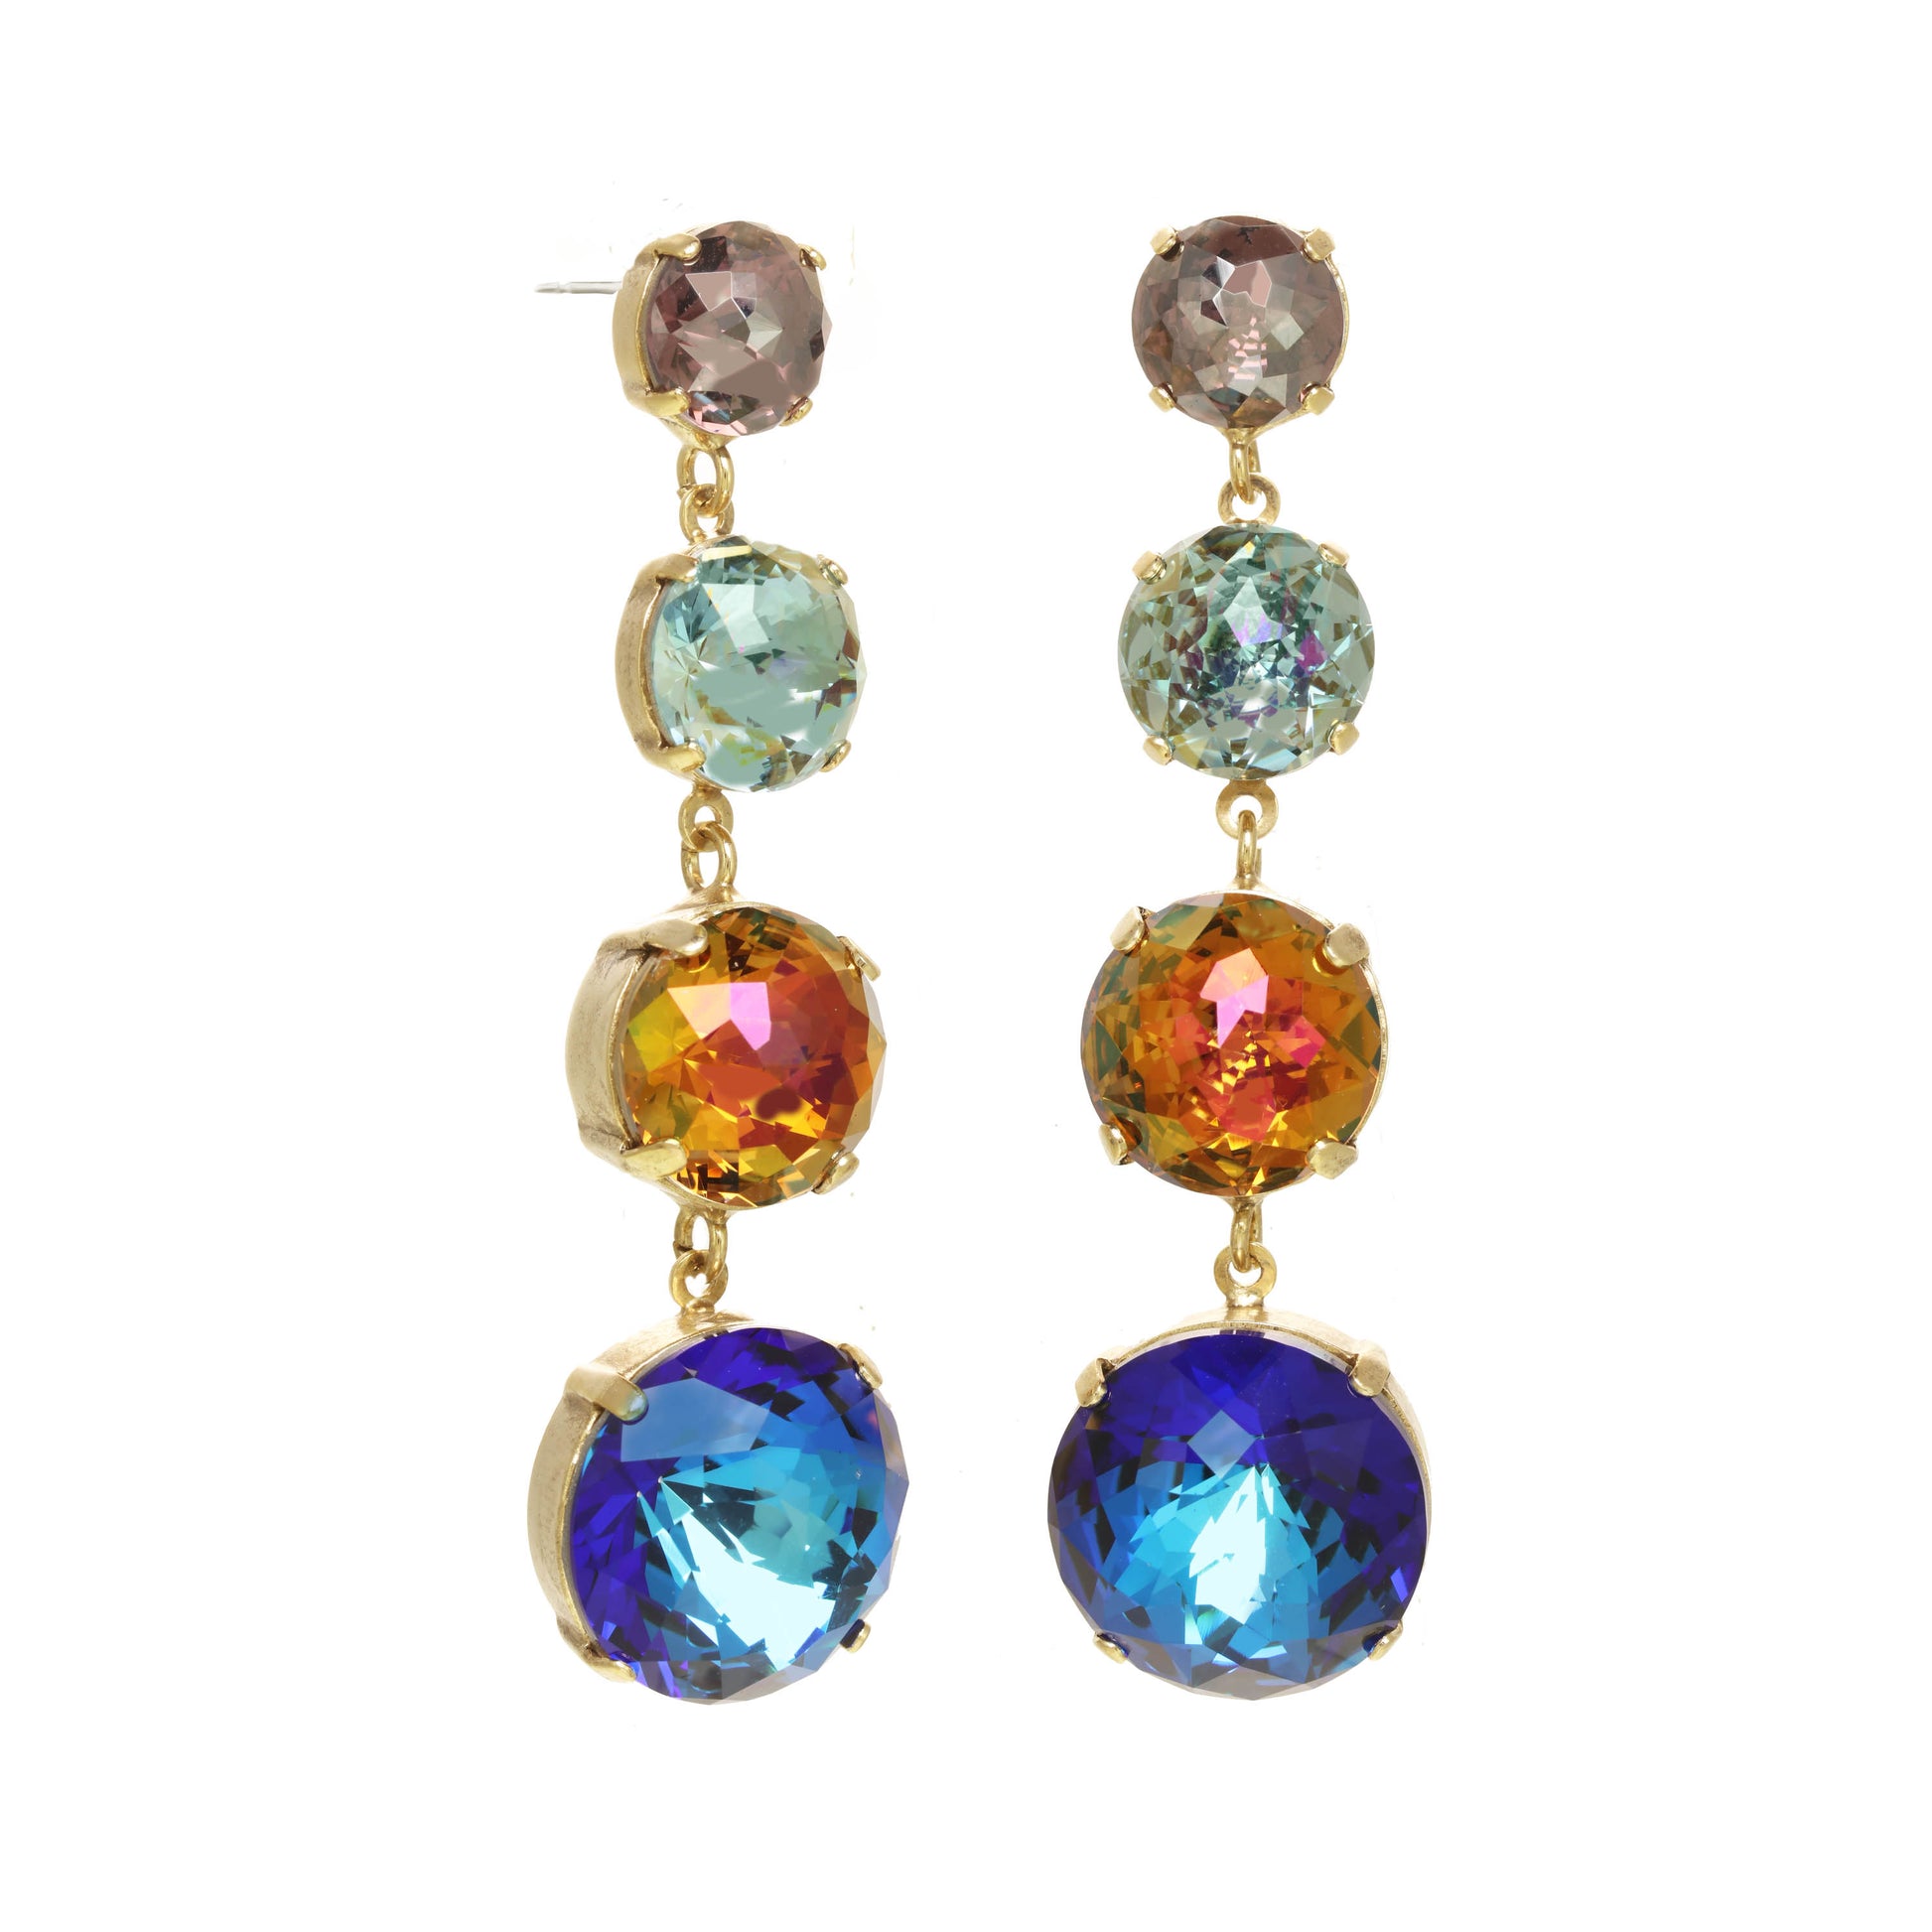 Tova Idina Earrings Bermuda blue shimmer with a combination of light-catching crystals